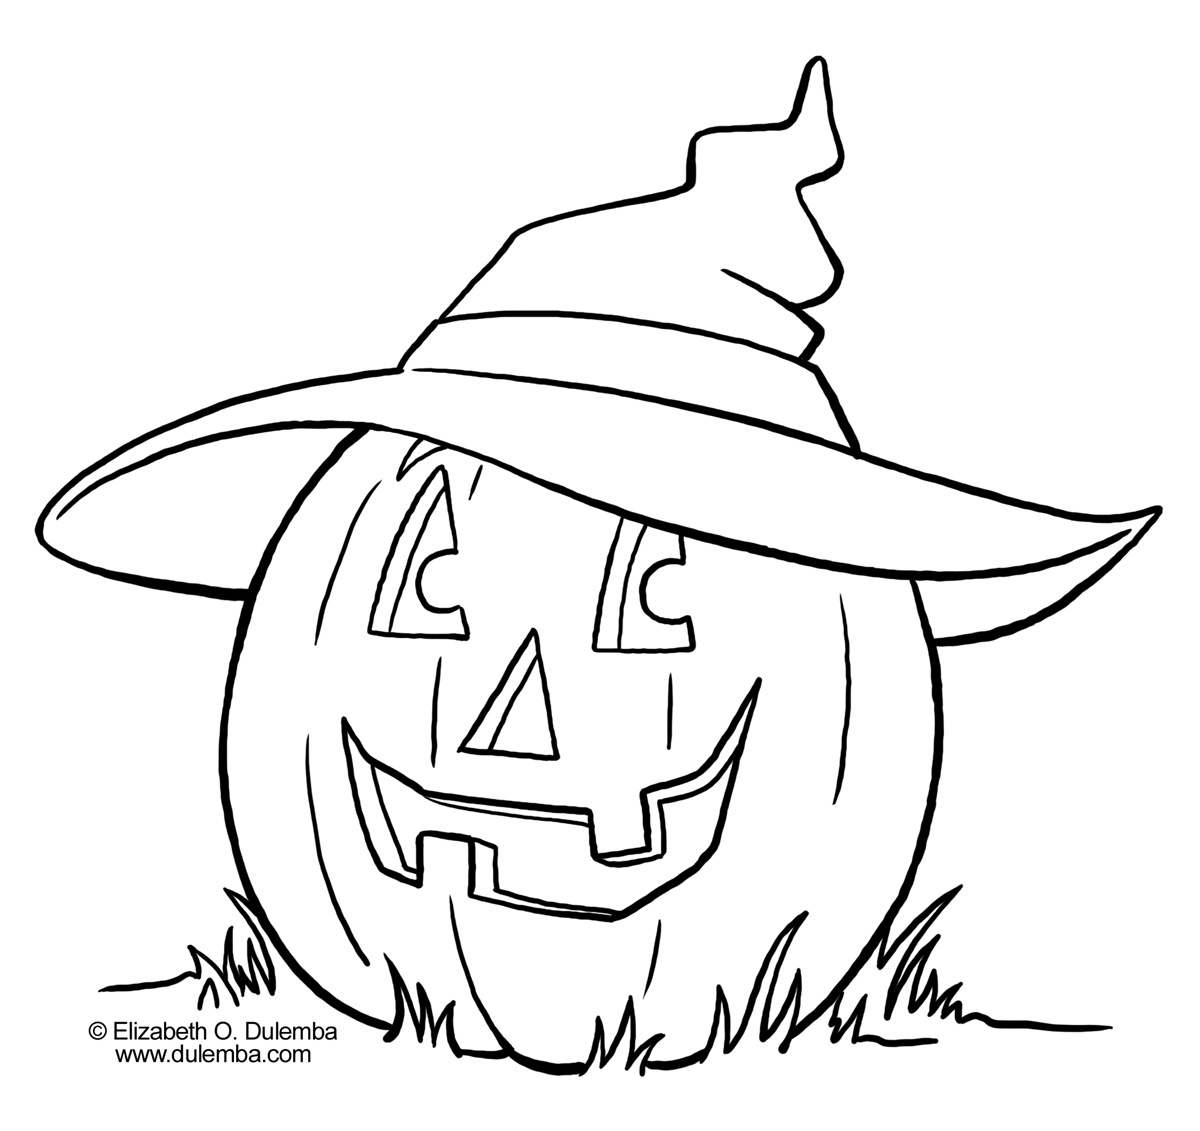 transmissionpress: Halloween Coloring Pictures